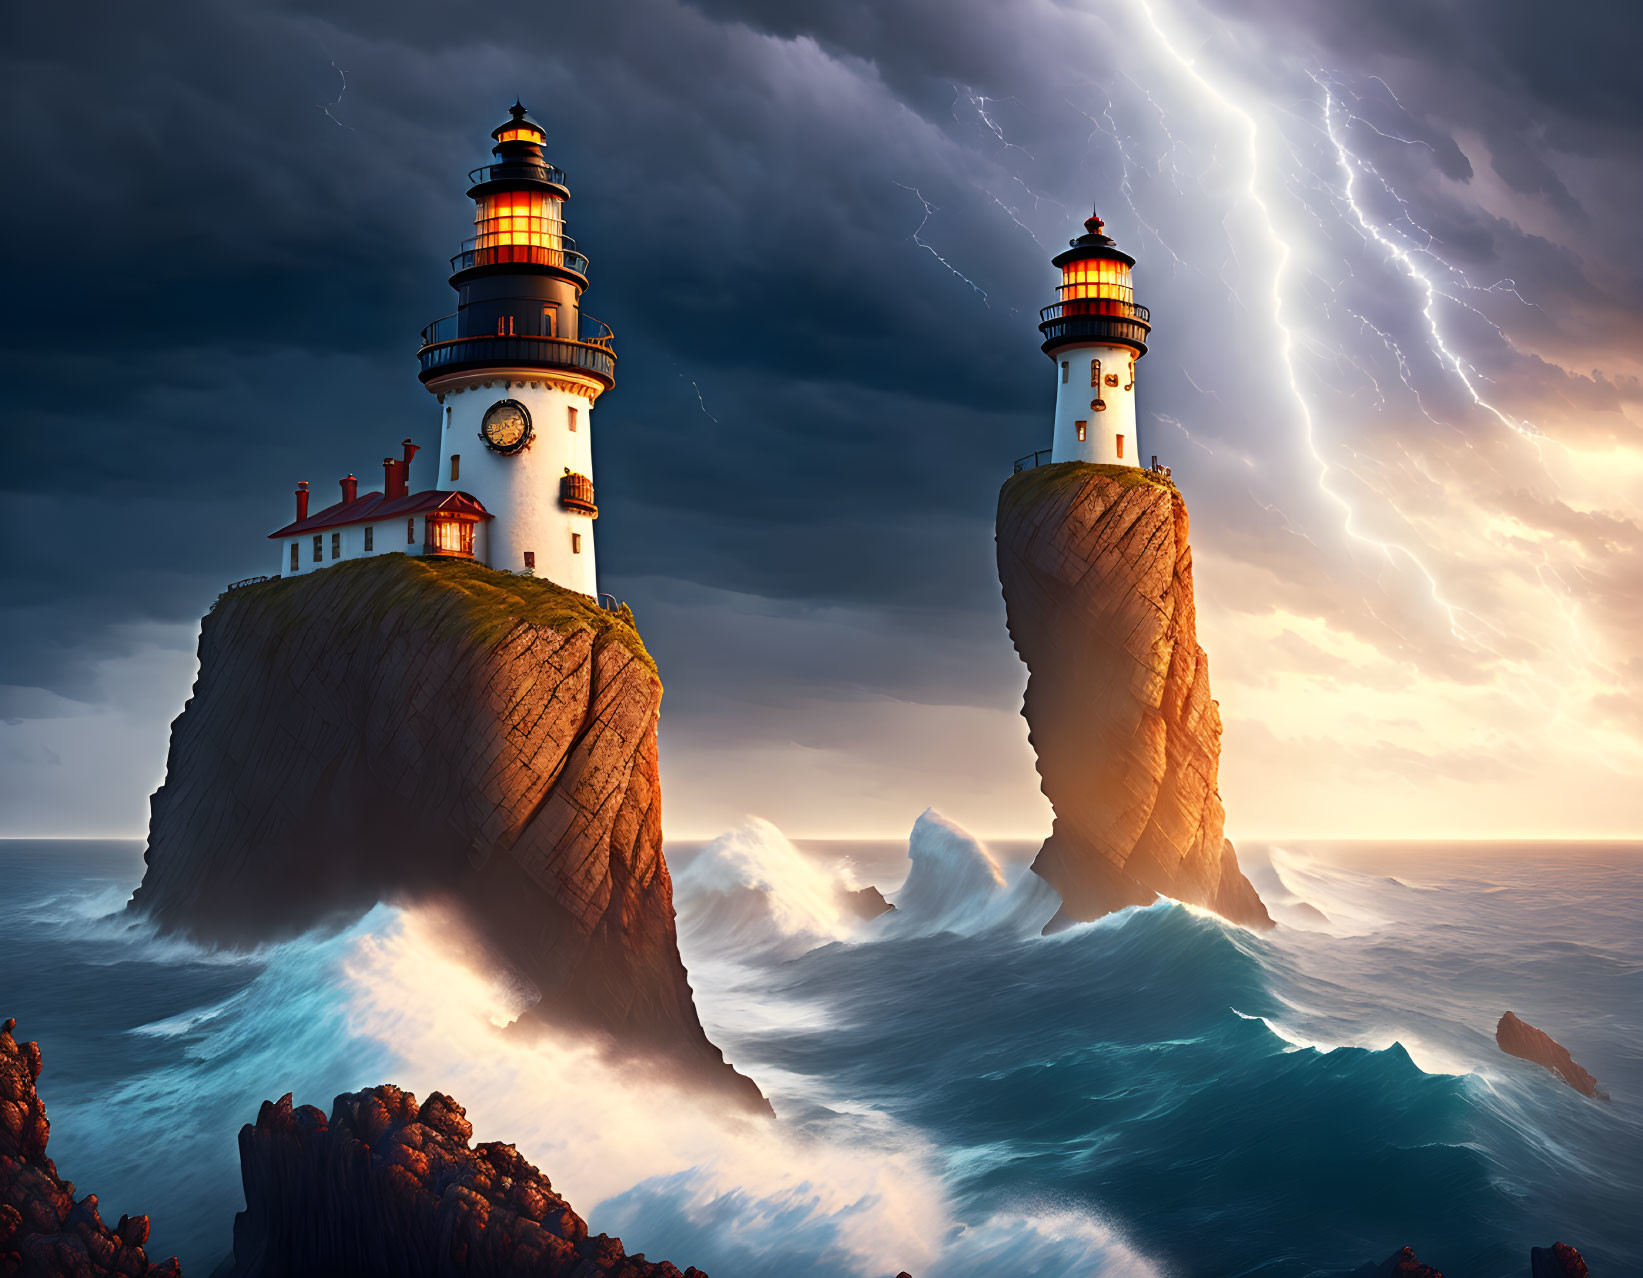 Stormy seas with two lighthouses on rocky outcrops